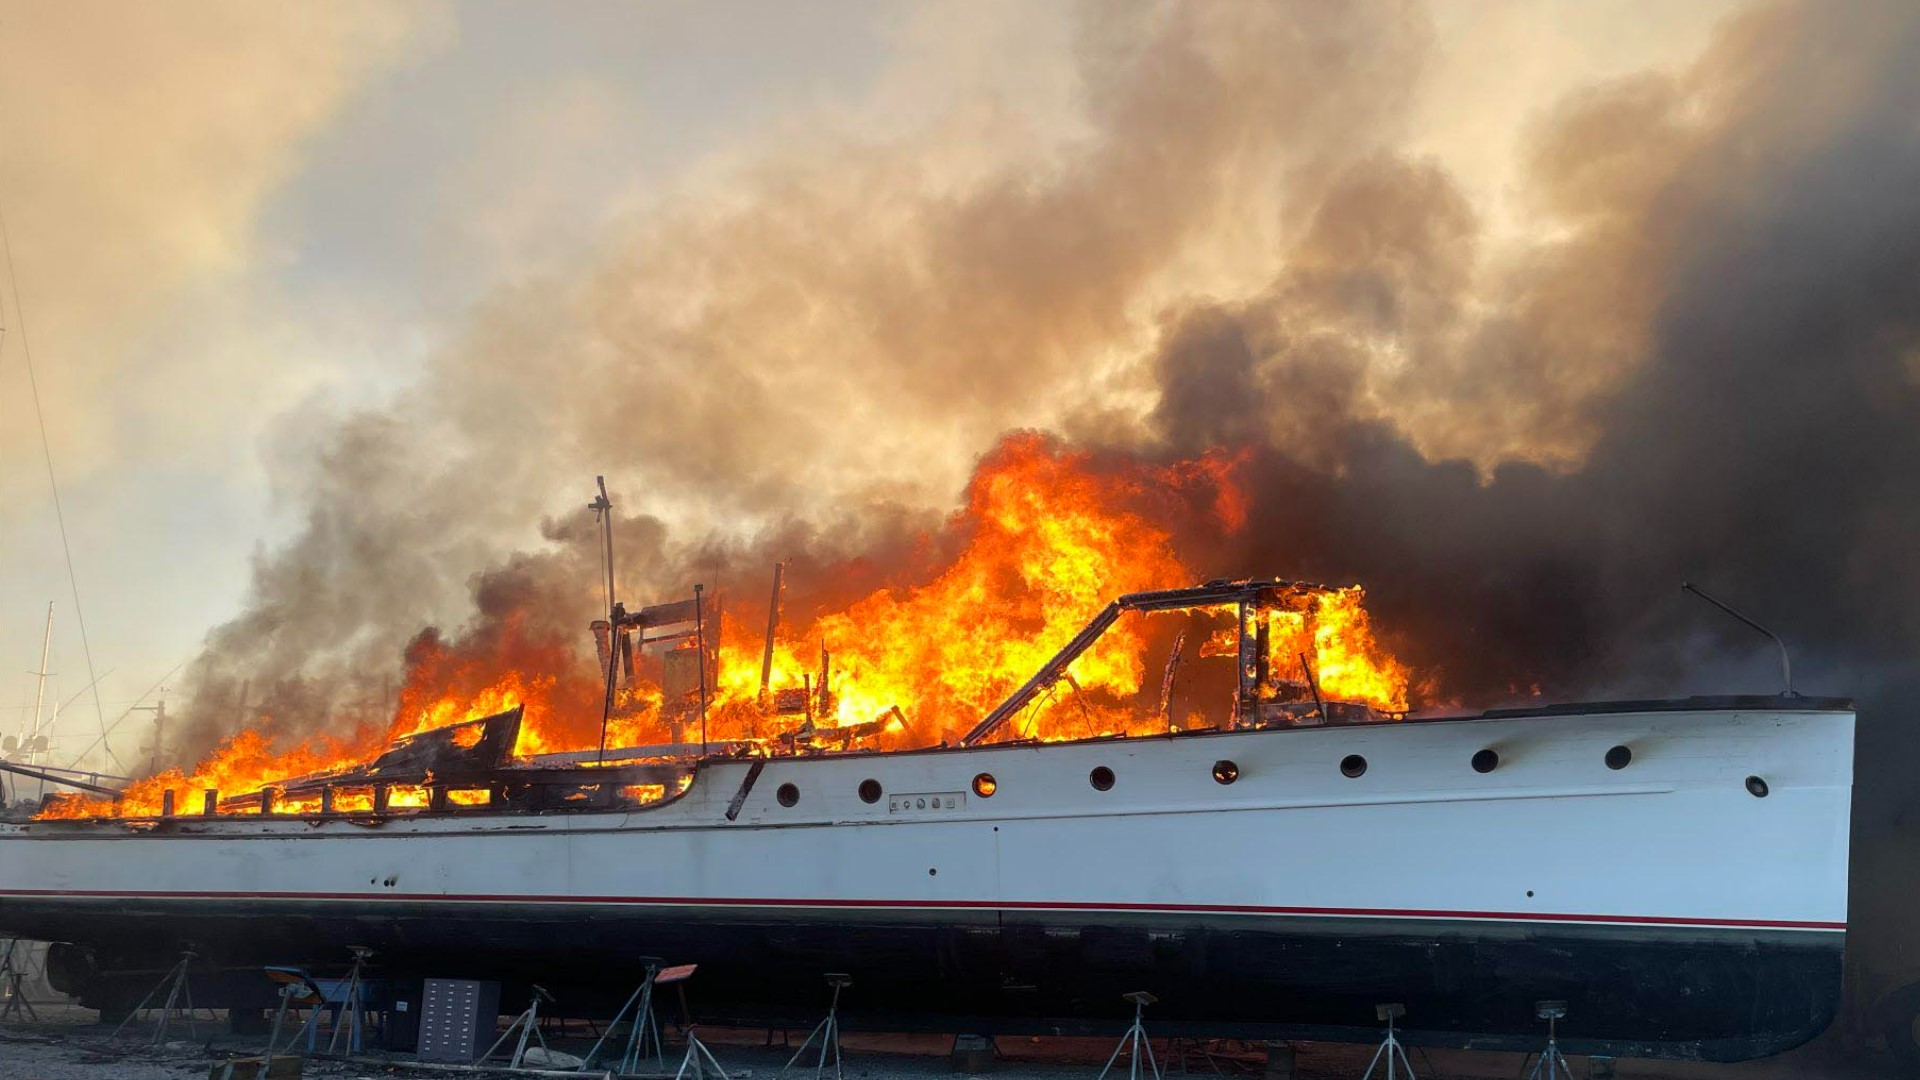 A three-alarm fire at the Seabrook Harbor and Marine facility in New Orleans left a large part of the facility and several boats badly damaged Sunday morning.